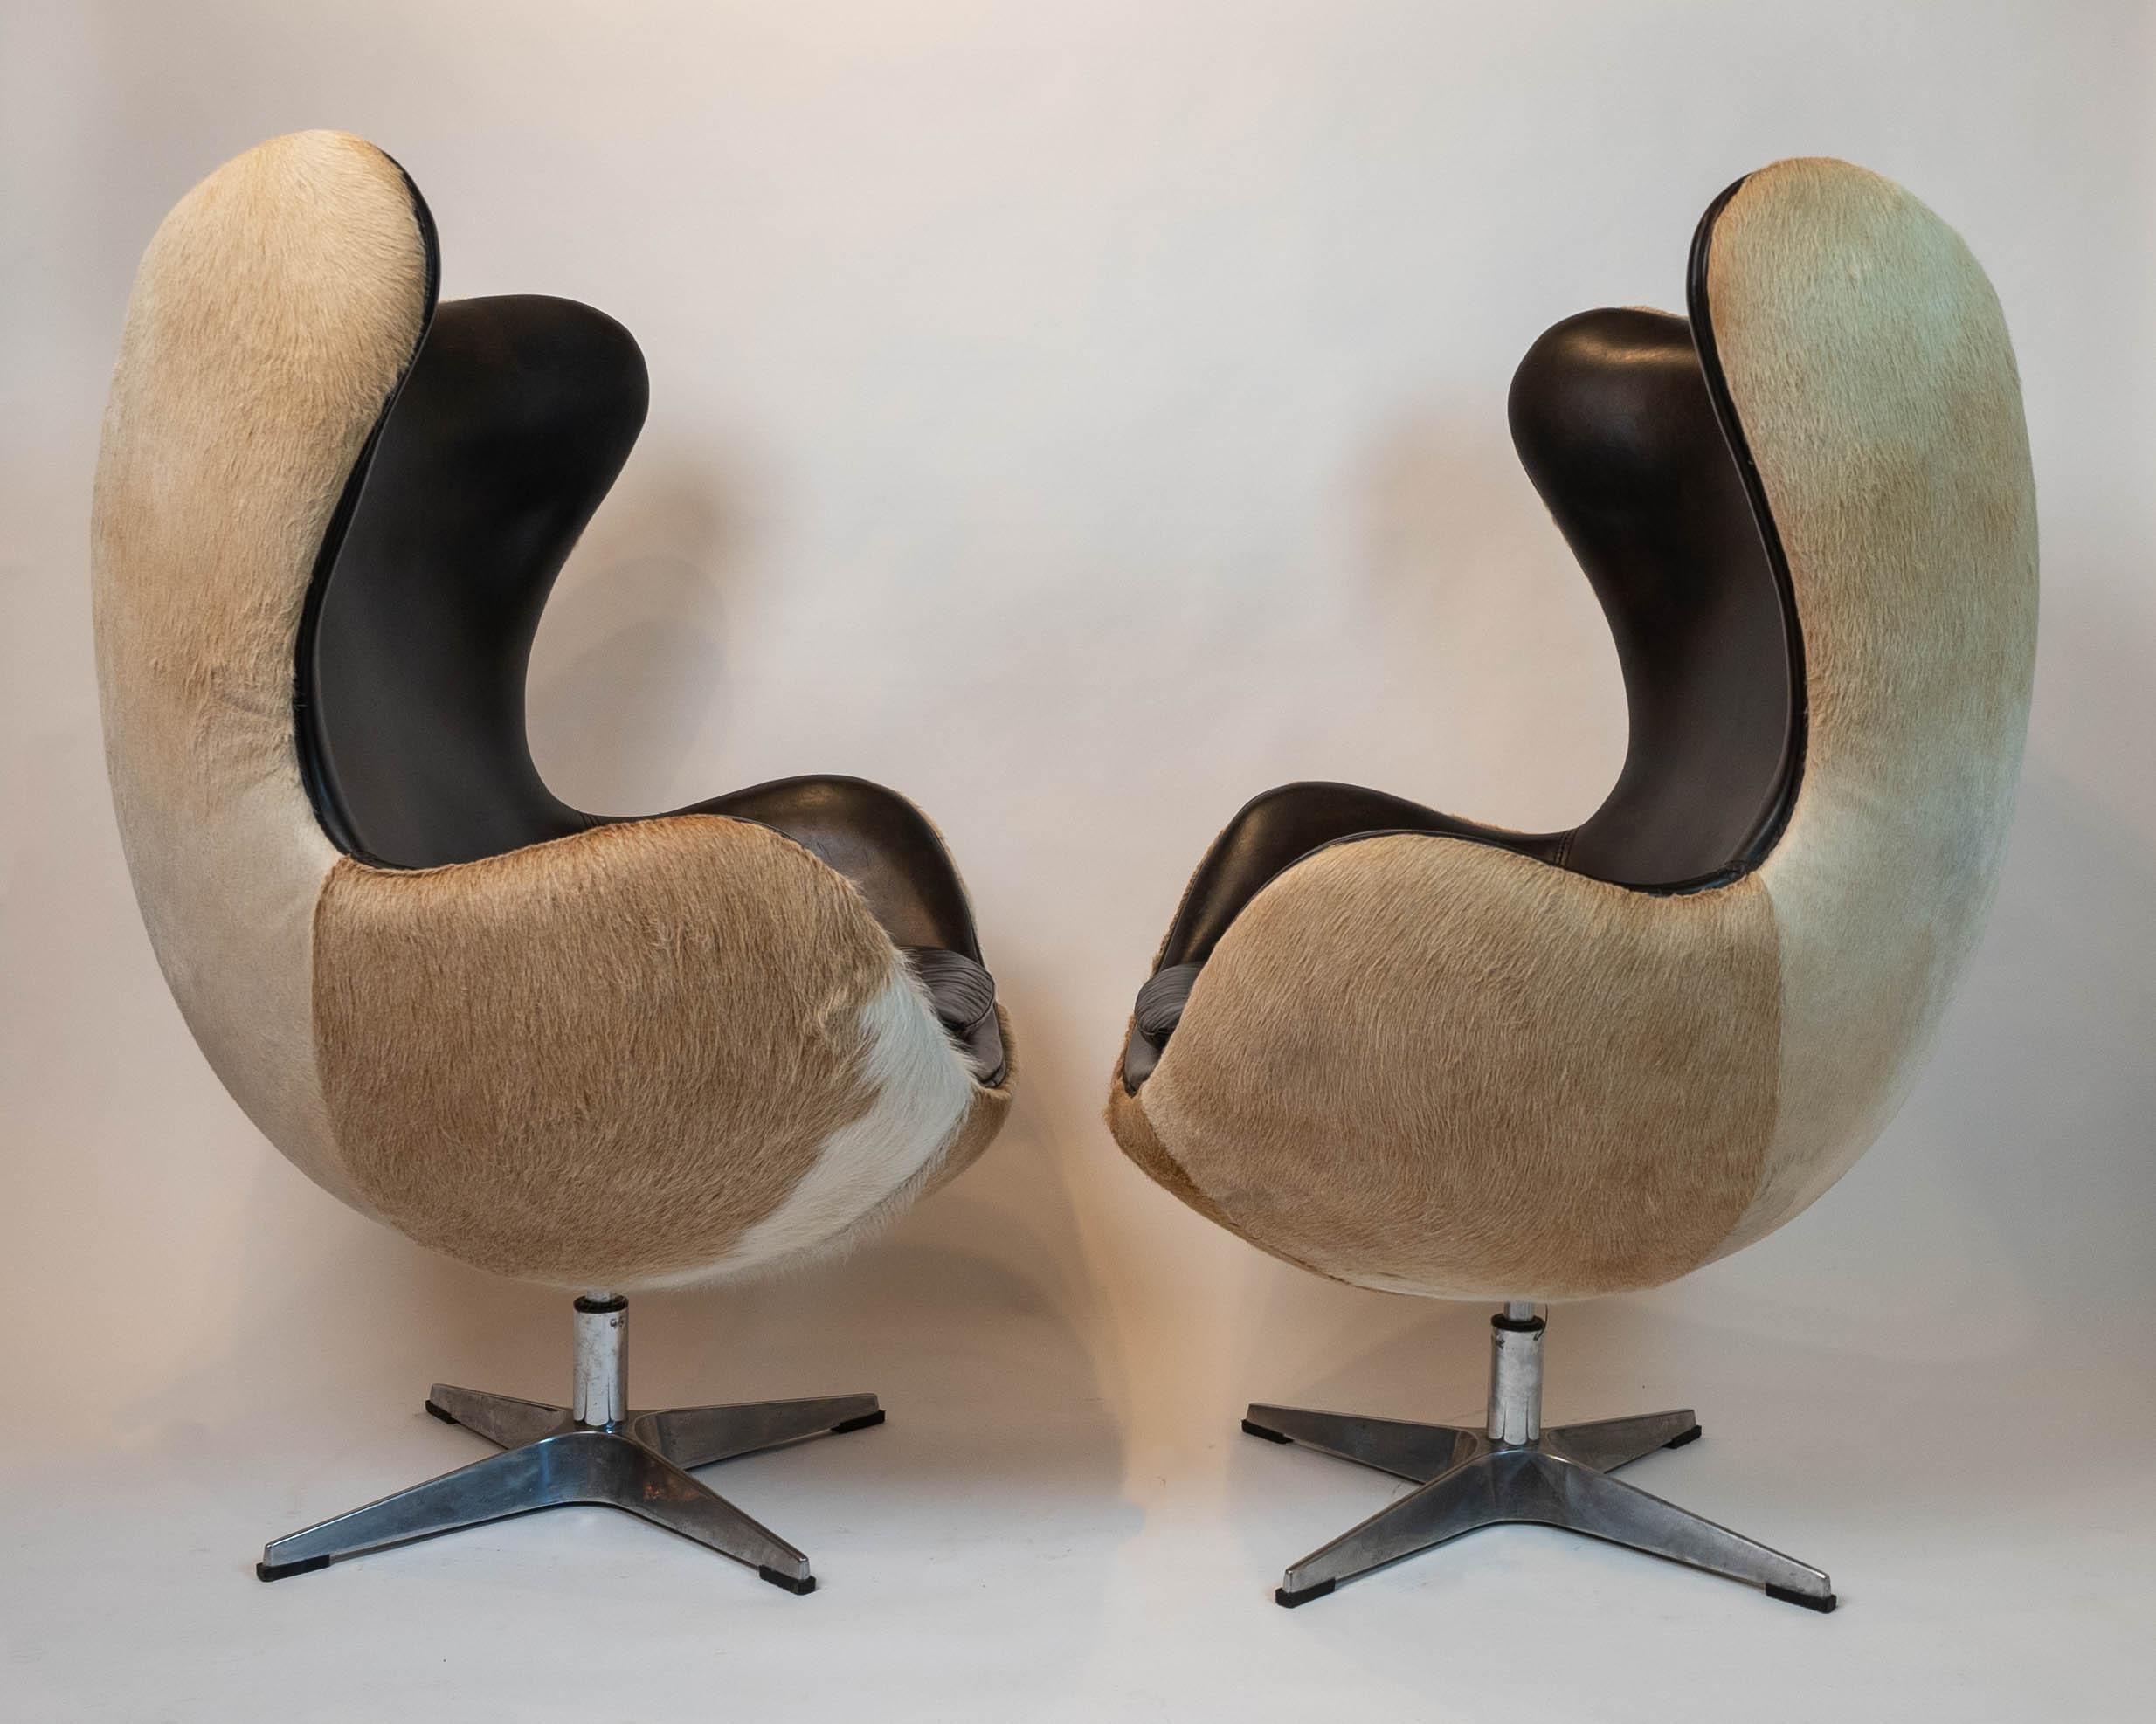 Show stopper iconic pair of vintage limited edition reproduction Arne Jacobsen Copenhagen inspired egg chairs having fiberglass shells upholstered with a sandy toned hair on hide on the exterior and contrasting supple black leather on the interior.